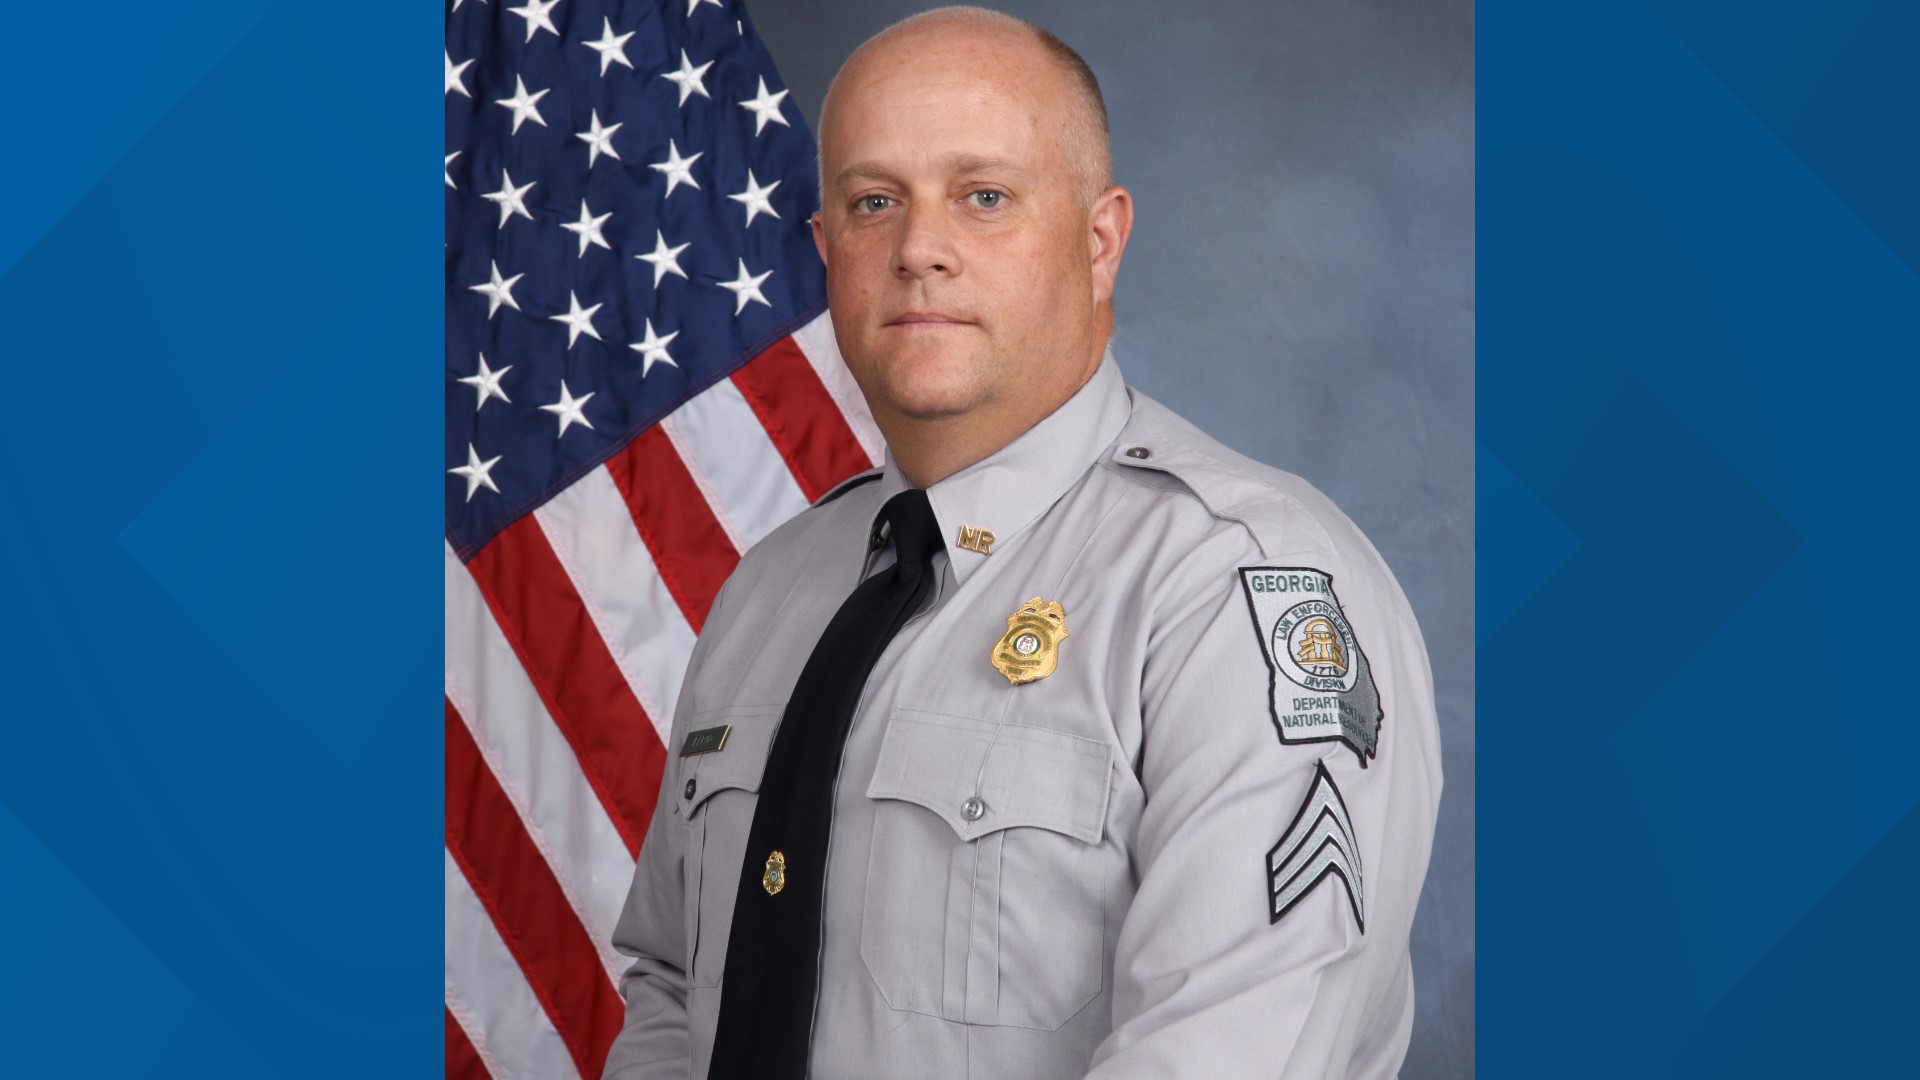 The Georgia Department of Natural Resources is mourning the loss of a longtime veteran in its law enforcement division.